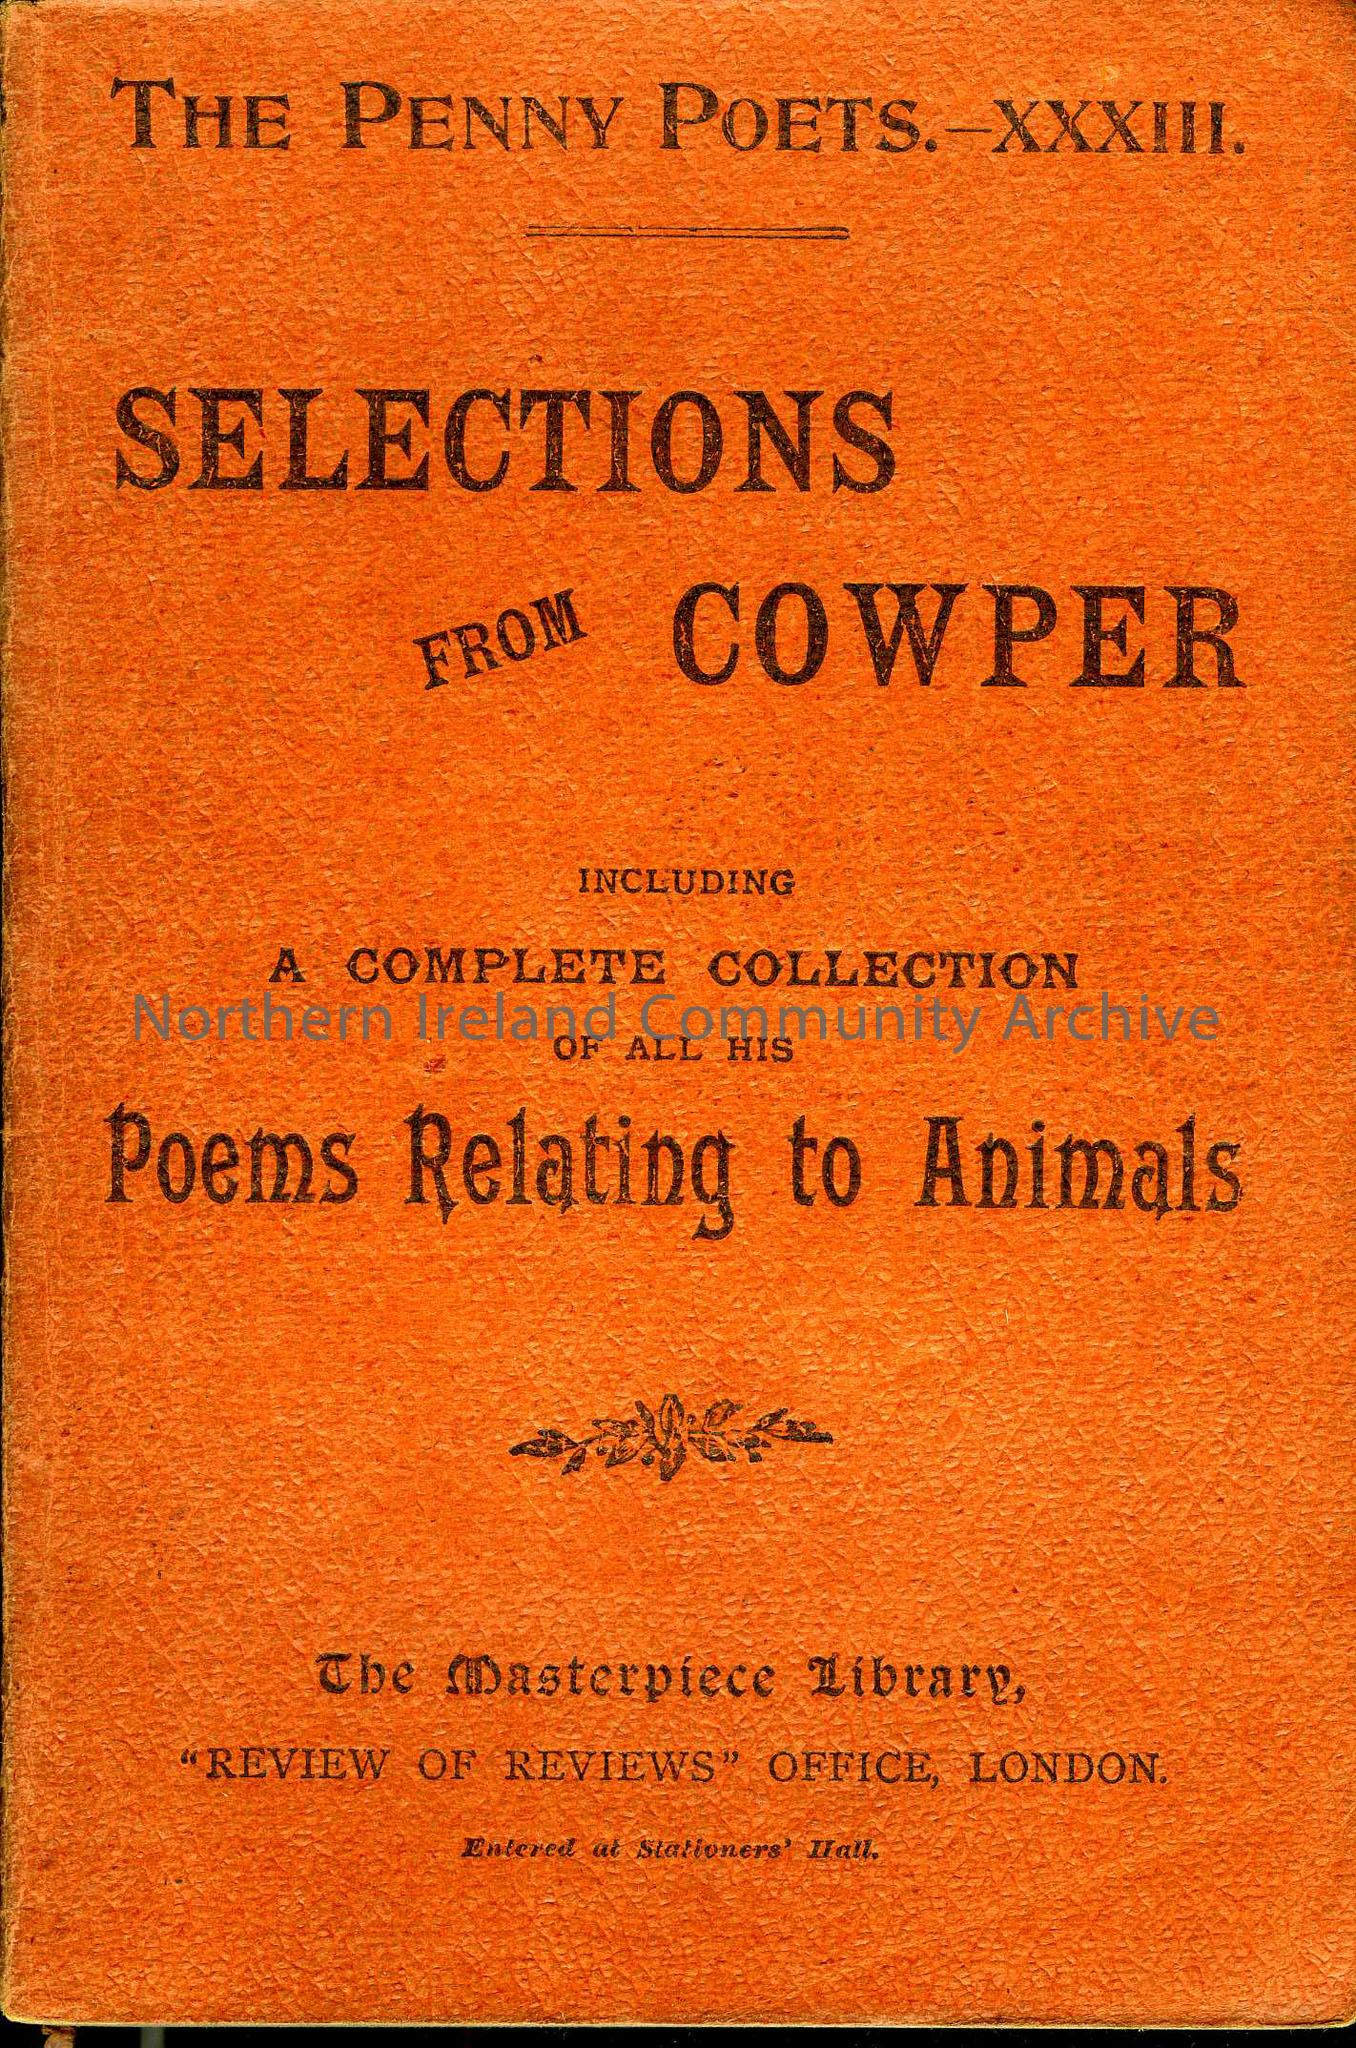 Selections from Cowper, including a complete collection of all his poems relating to animals